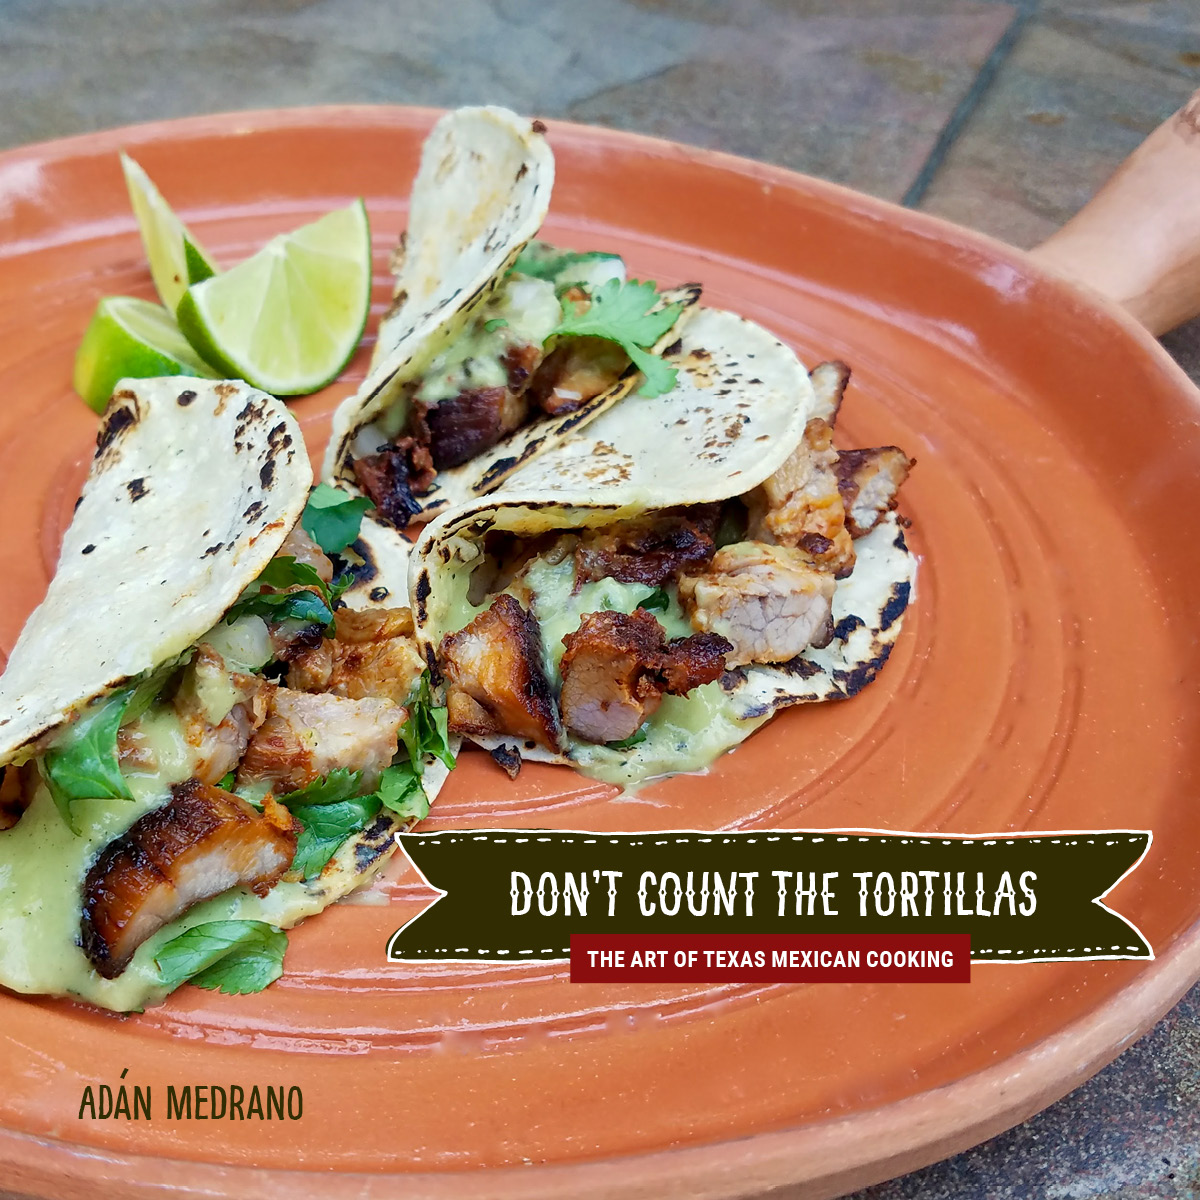 Award-winning Cookbook, "Don't Count The Tortillas: The Art of Texas Mexican Cooking"